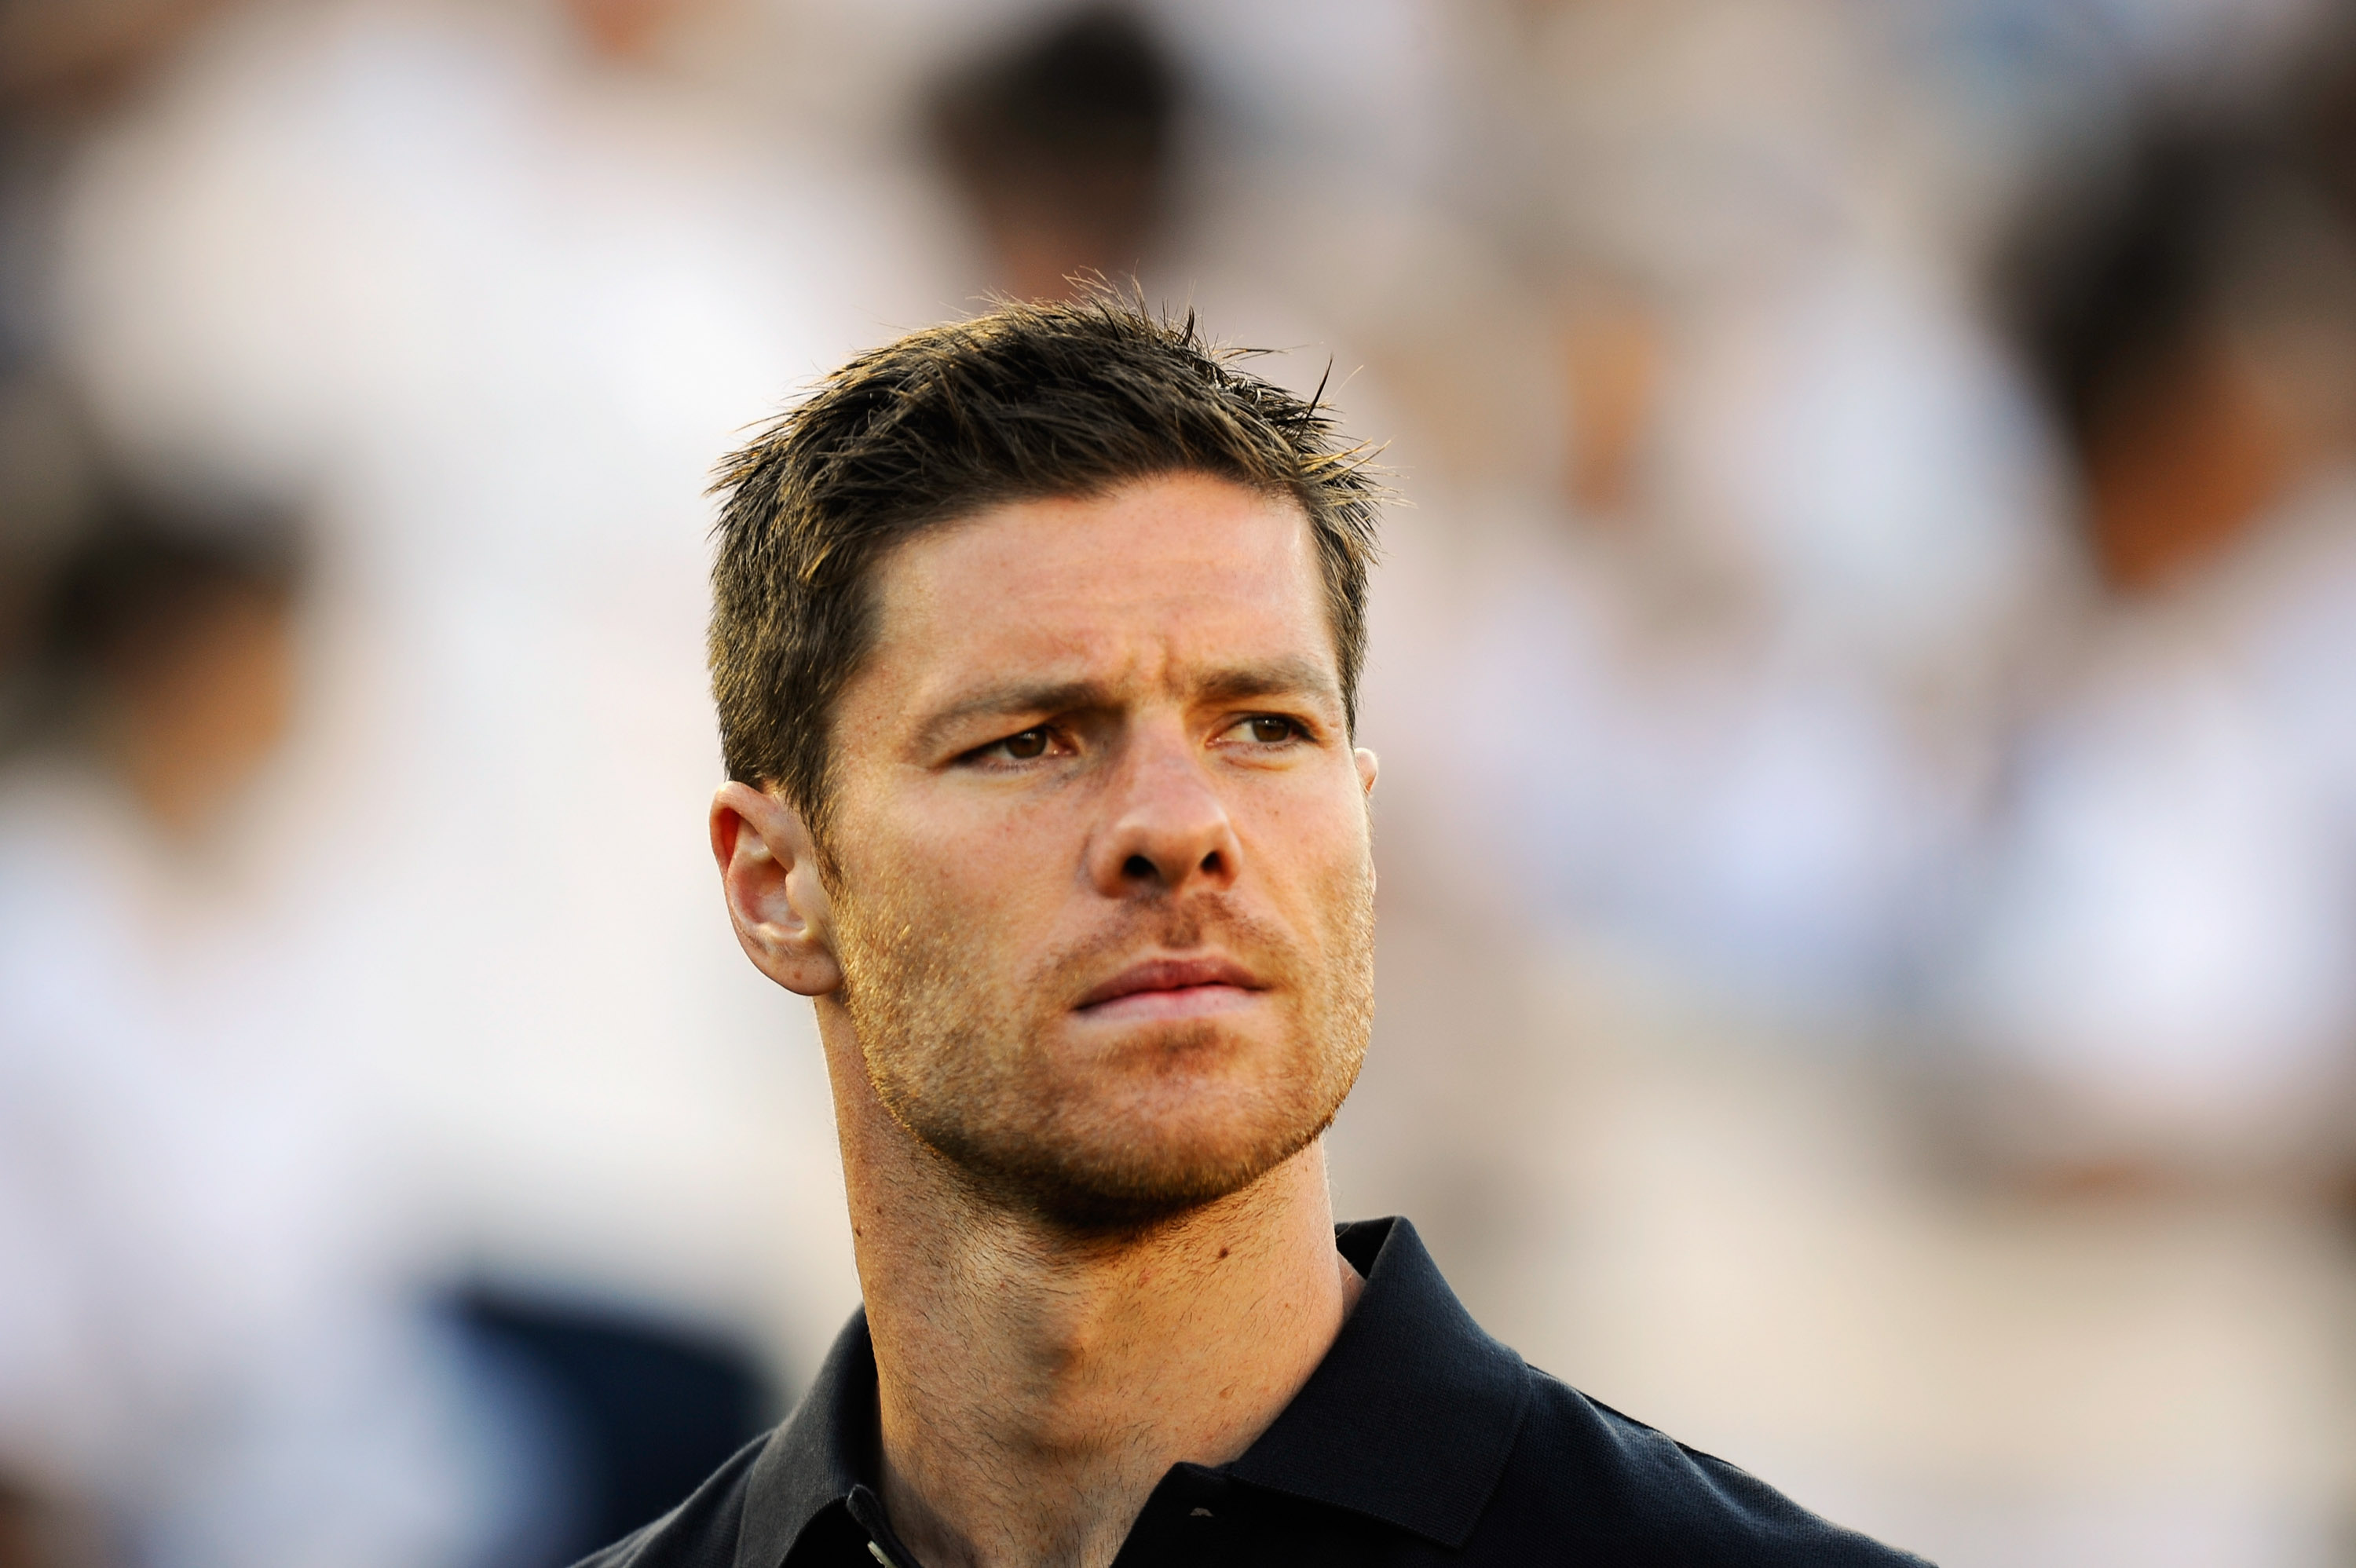 PASADENA, CA - AUGUST 07:  Xabi Alonso of Real Madrid during the pre-season friendly soccer match against Los Angeles Galaxy on August 7, 2010 at the Rose Bowl in Pasadena, California. Real Madrid will travel back to Spain after the soccer match completin